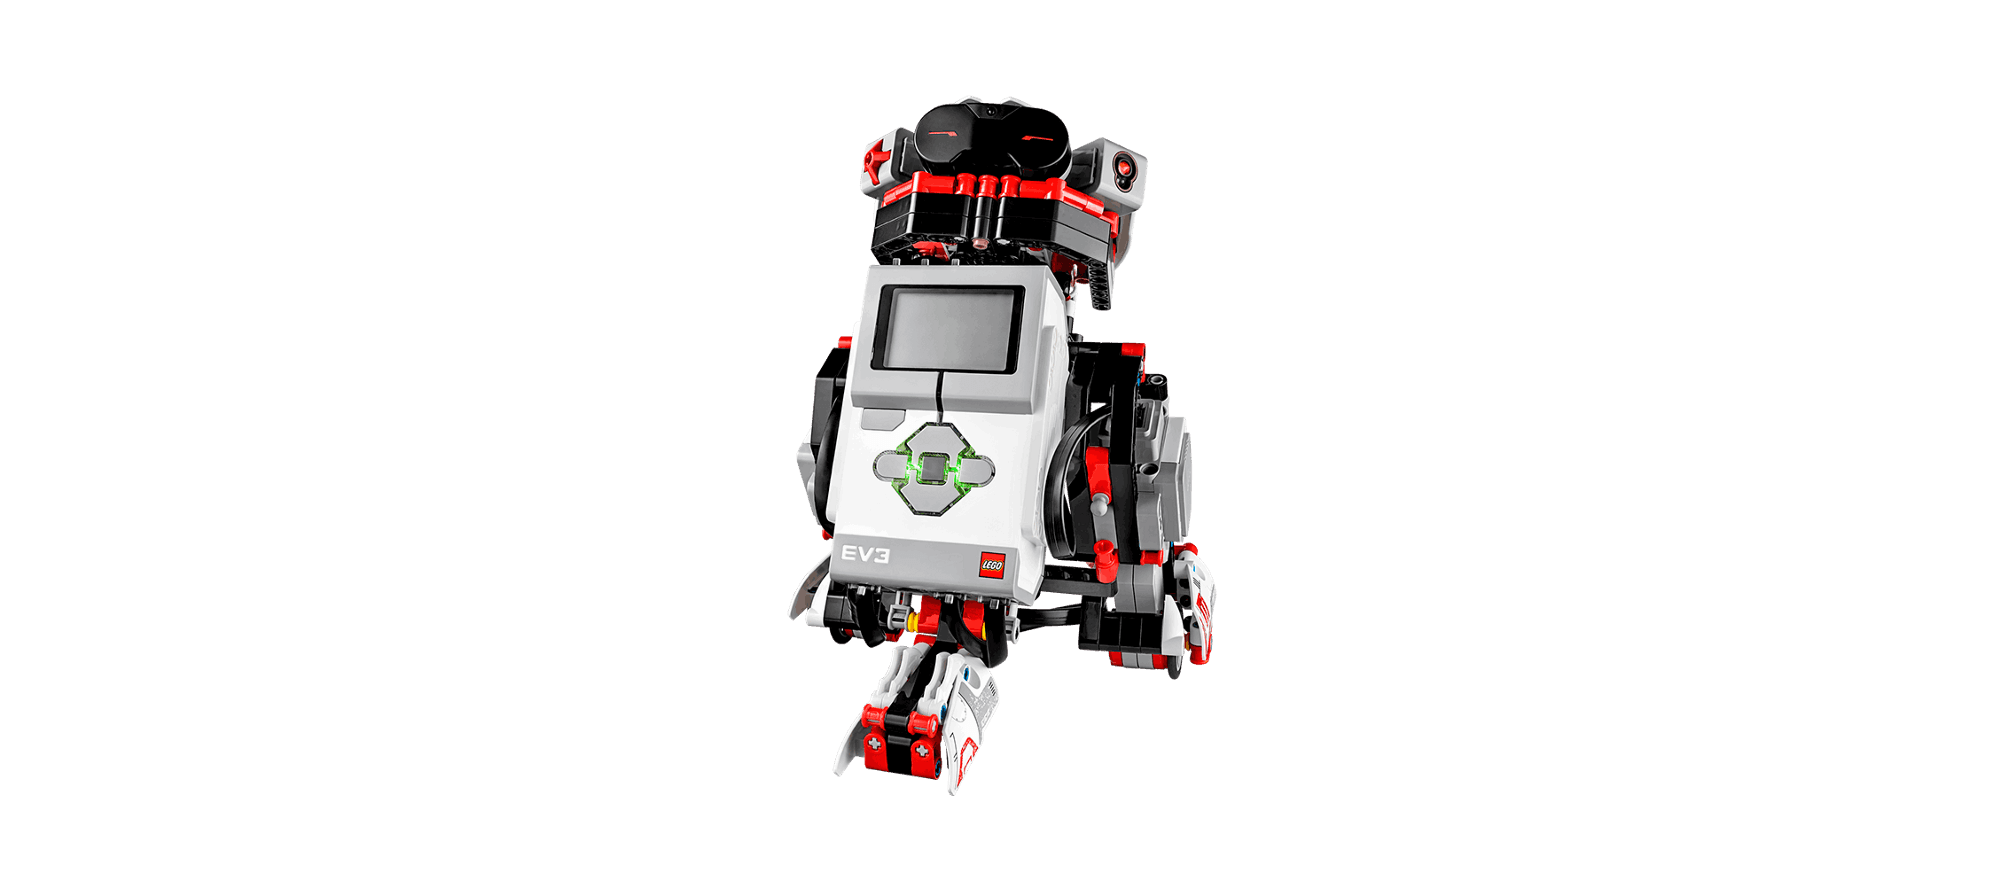 Cellular Connected IoT with Lego EV3, Linux Network and Huawei Cellular | Soracom